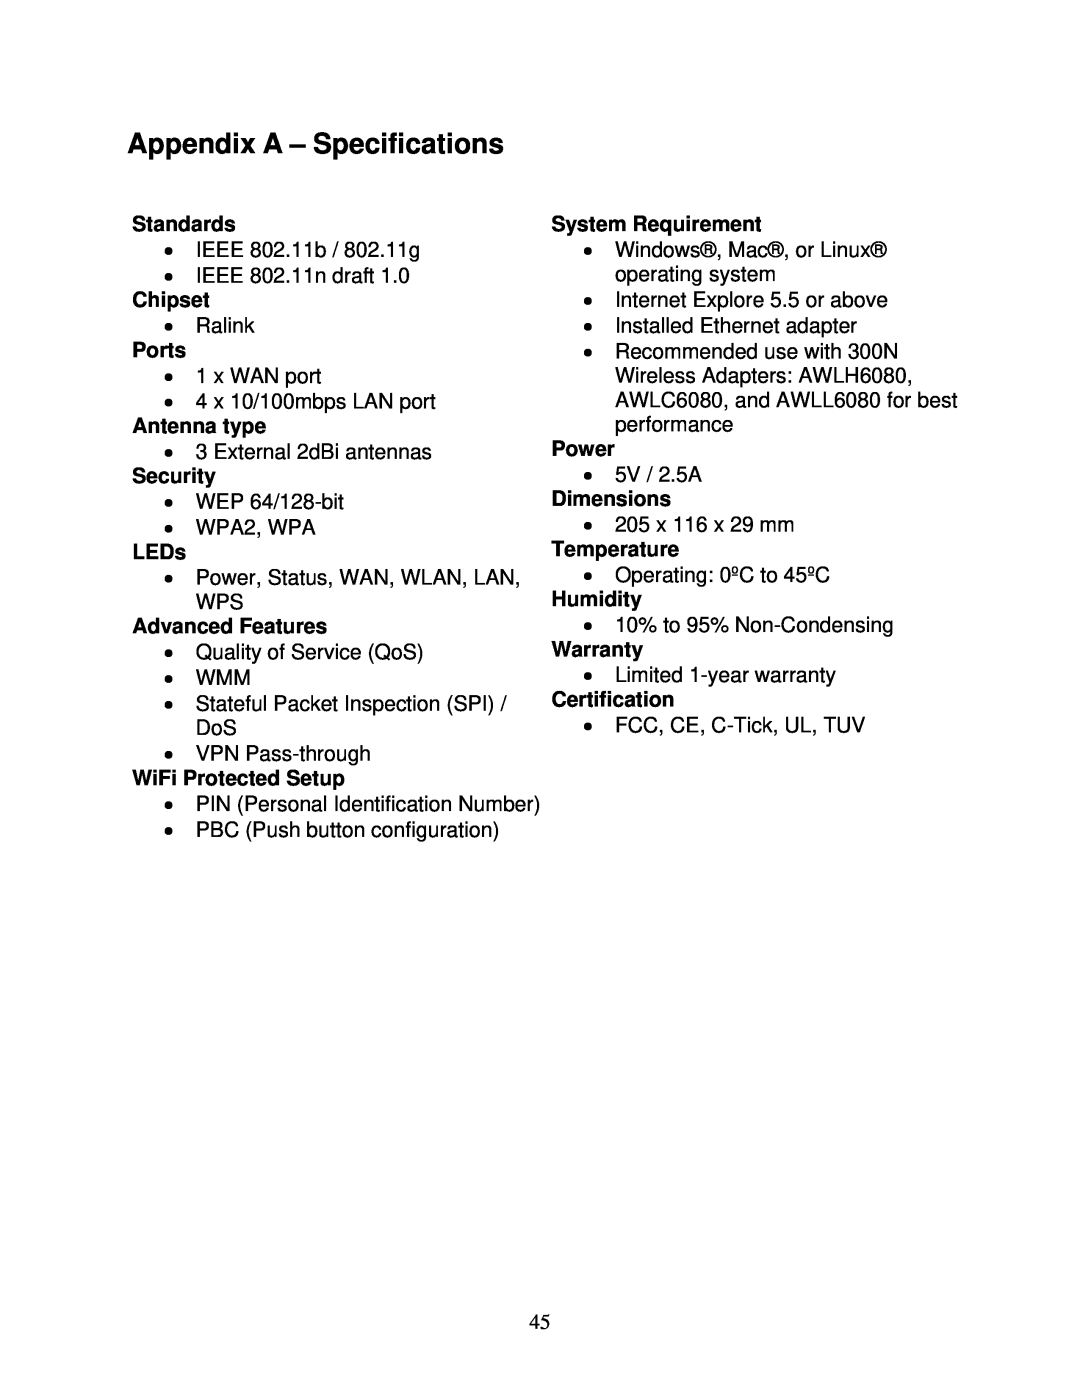 Airlink101 300N user manual Appendix A - Specifications 